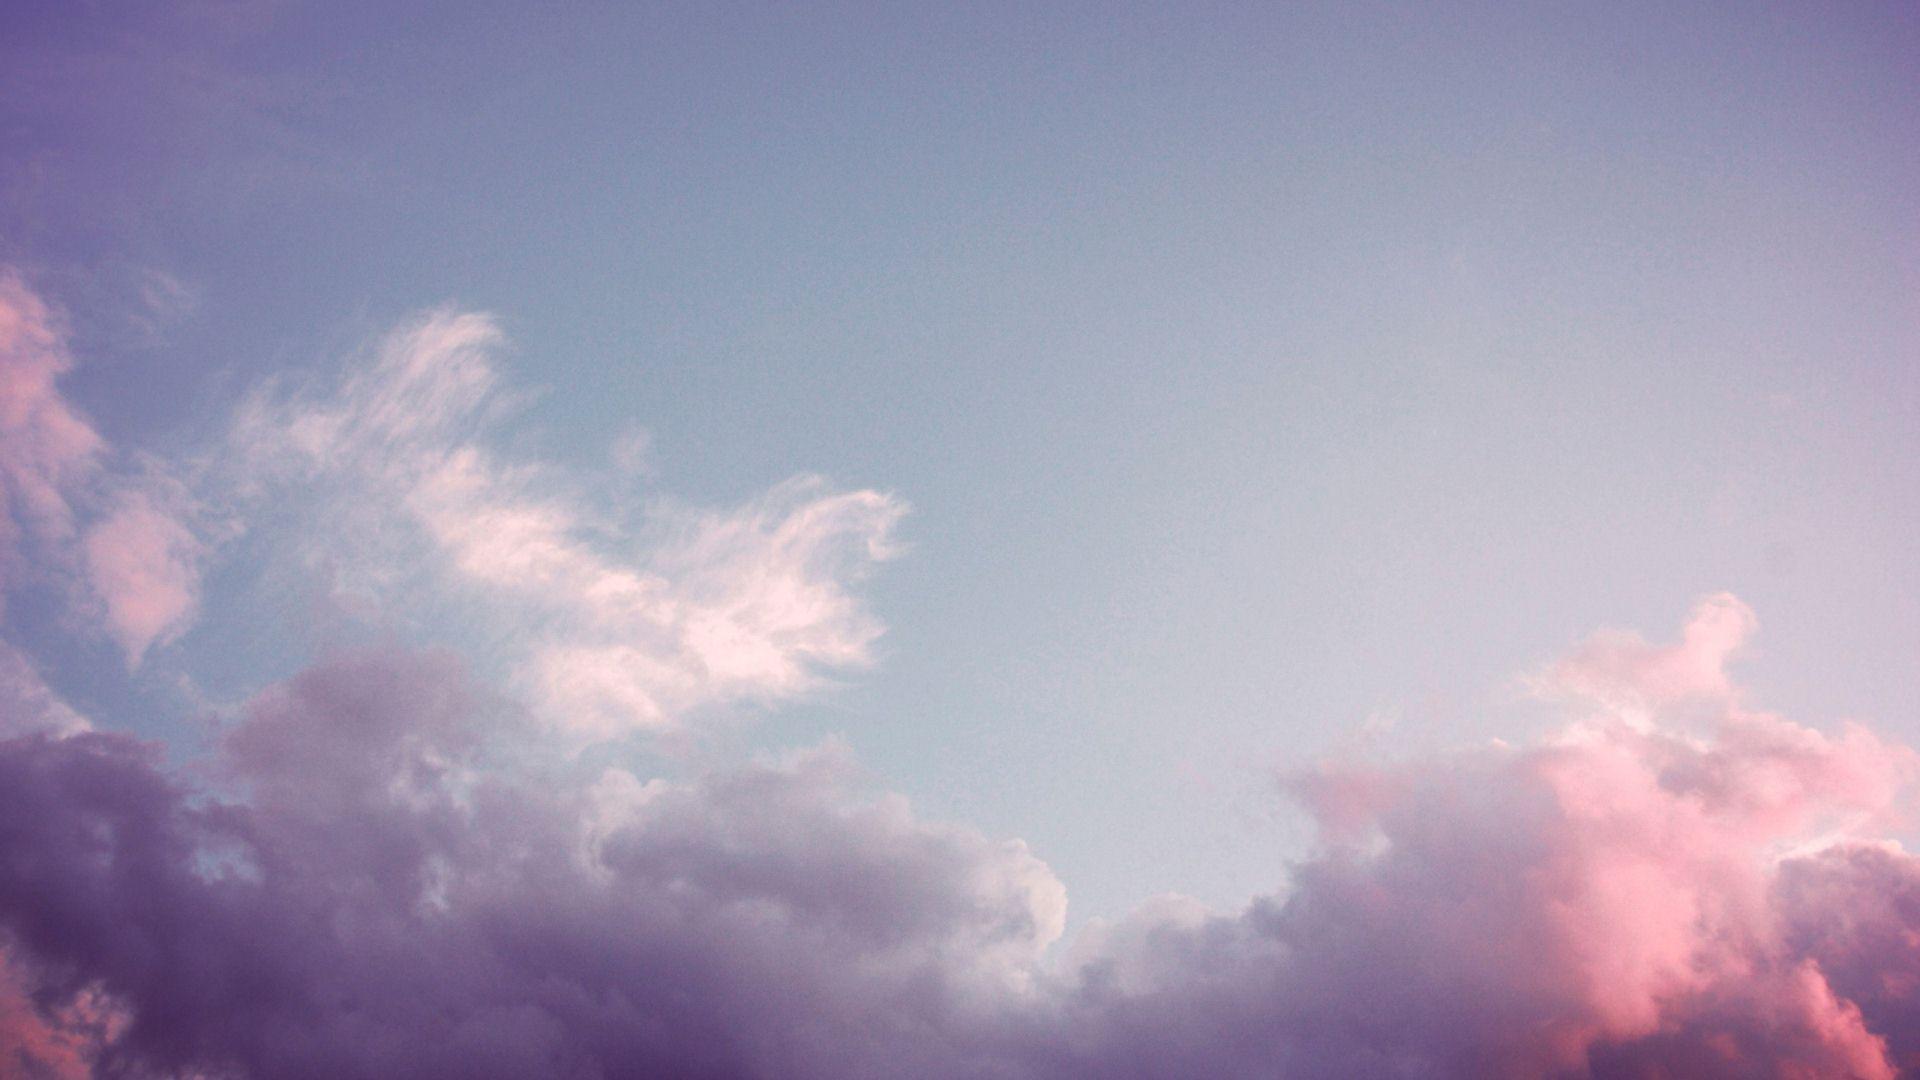 Aesthetic Clouds Wallpapers posted by Michelle Sellers